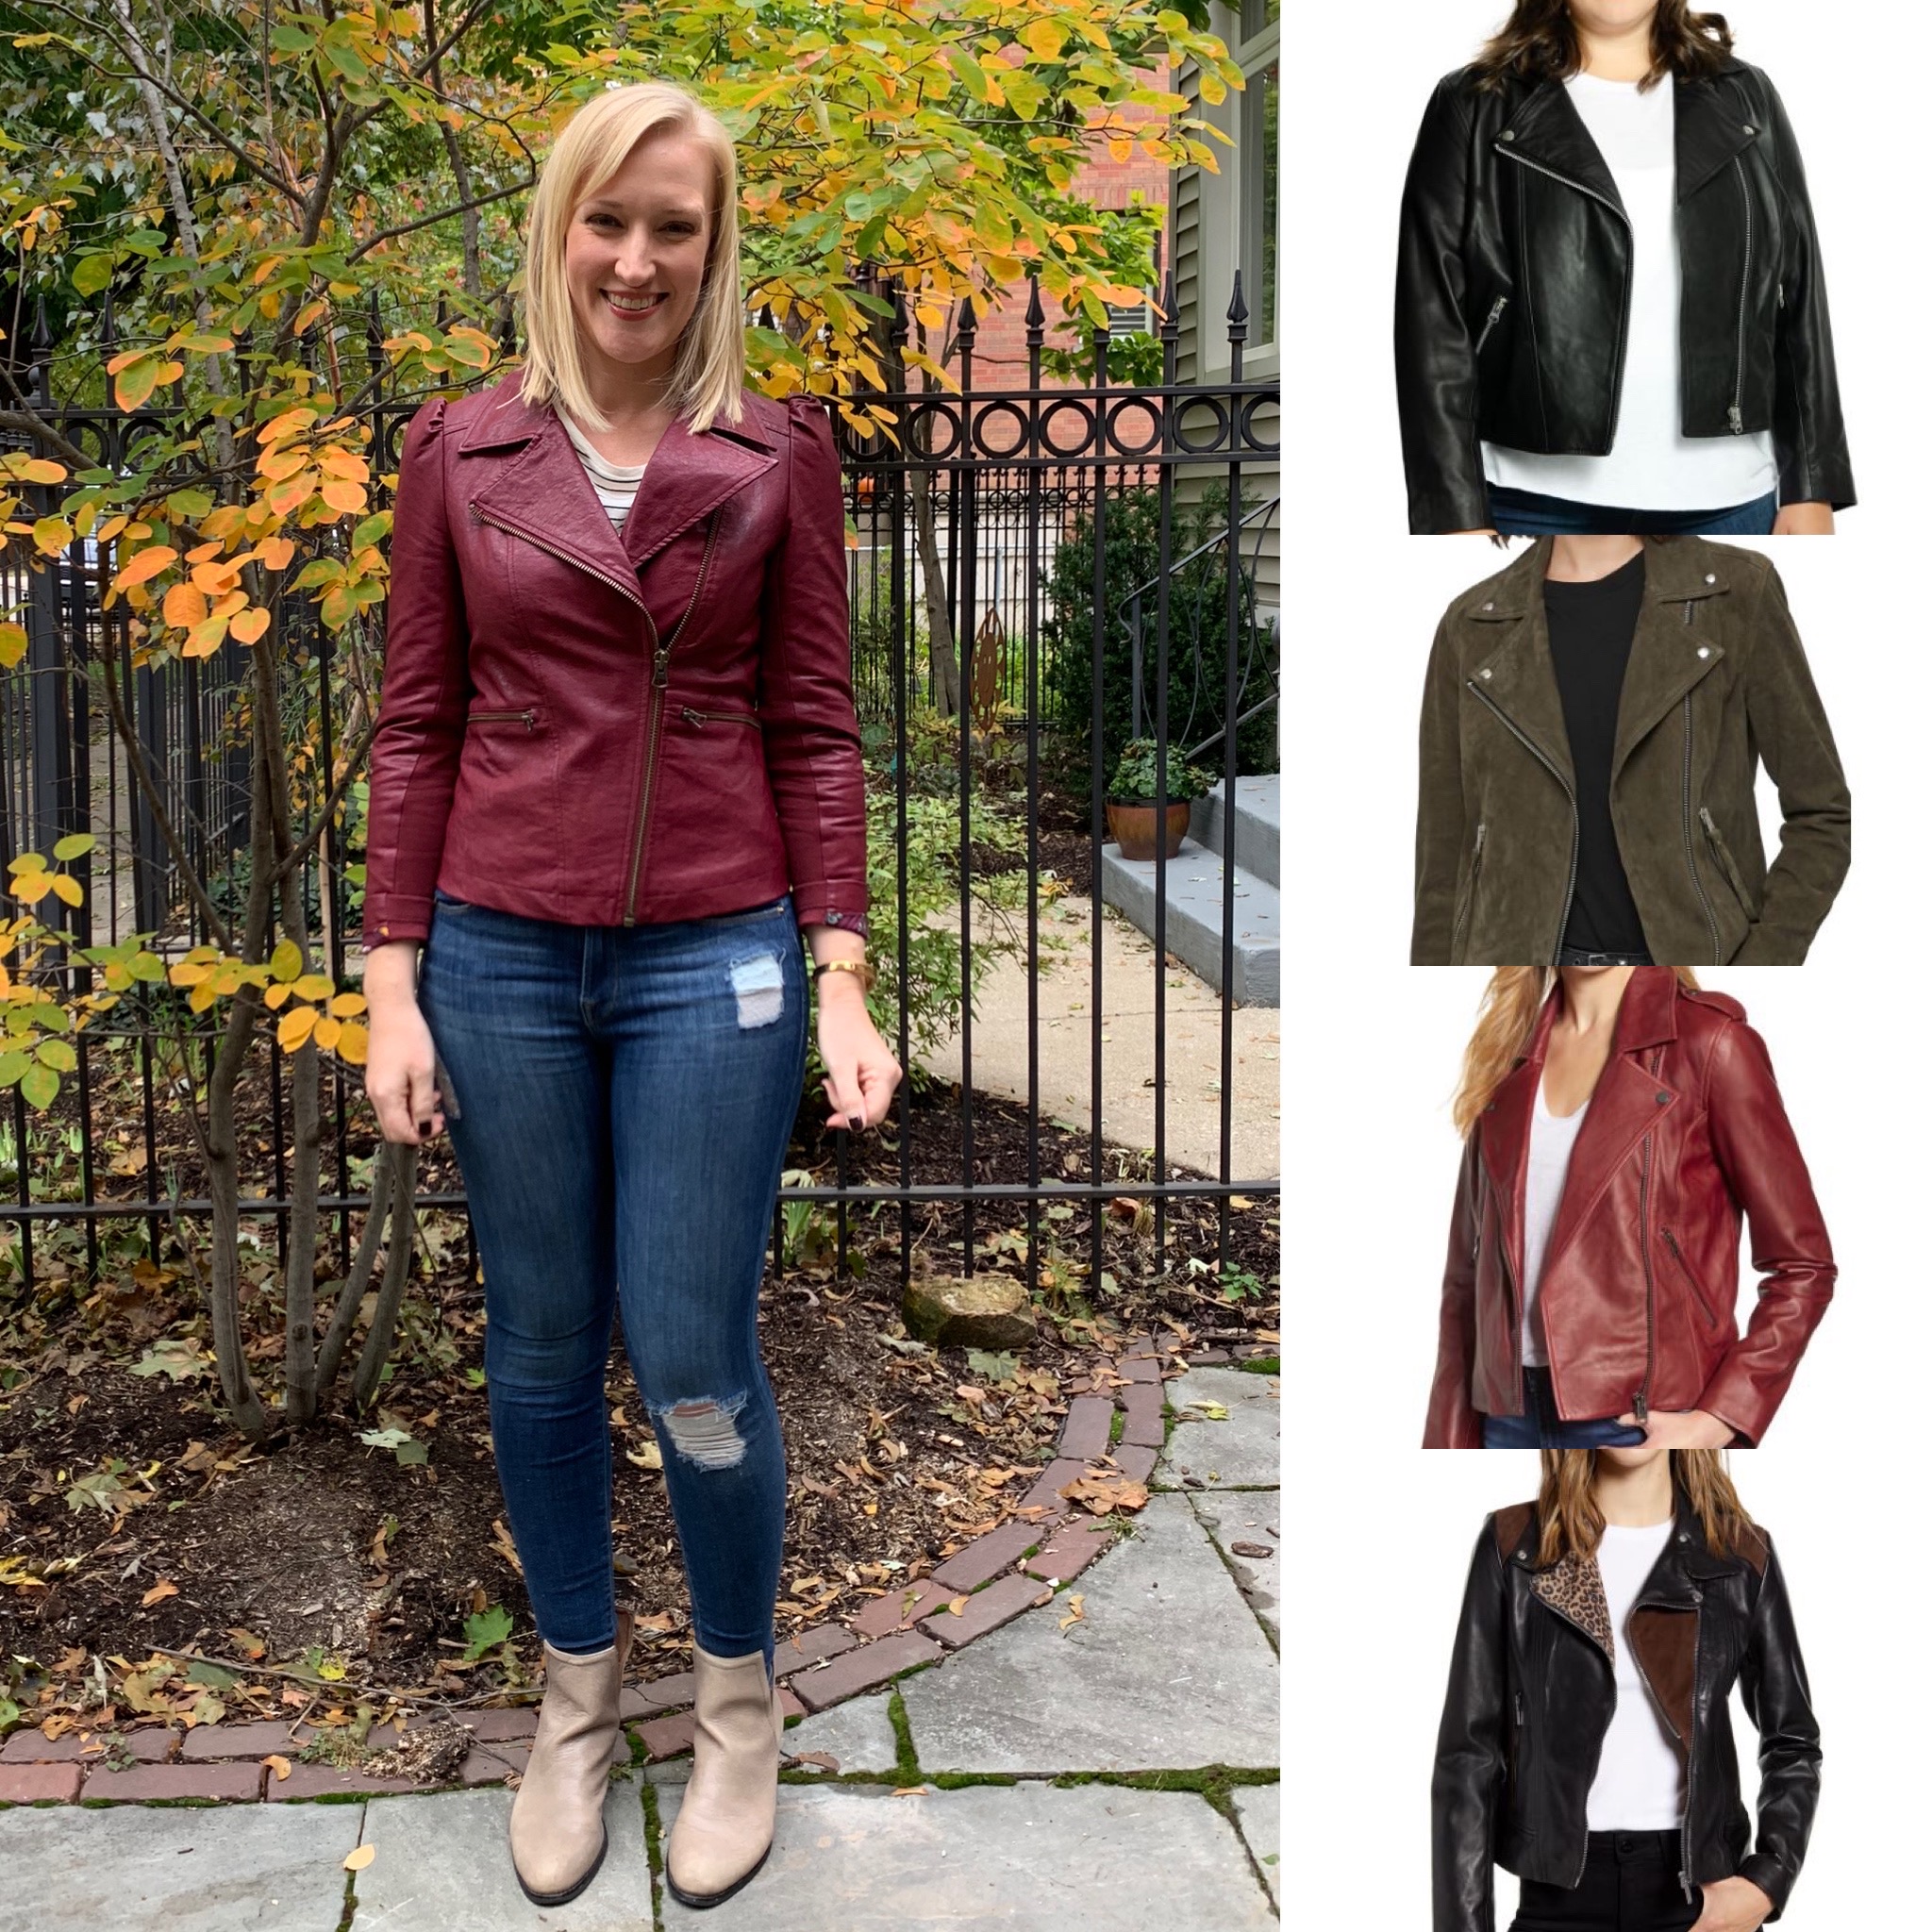 Leather Jackets and Moto Jackets for your fall wardrobe